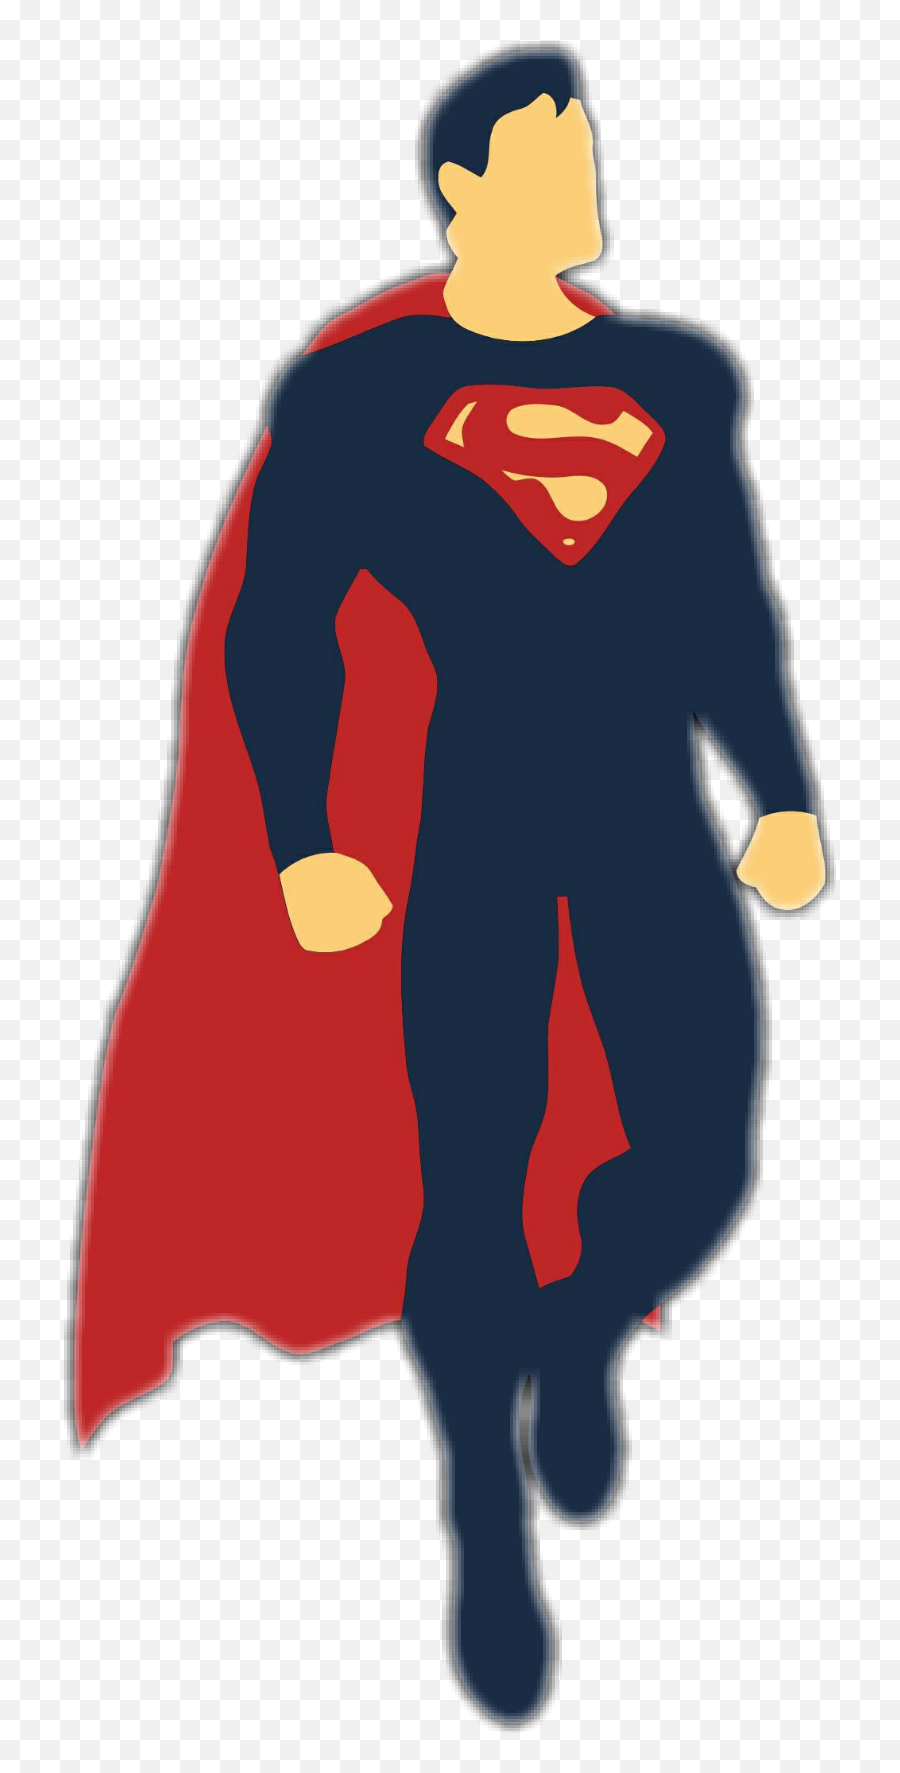 Red Cape Superman Blue Sticker By Cole Matthys - Superman Emoji,Is There A Superman Emoji